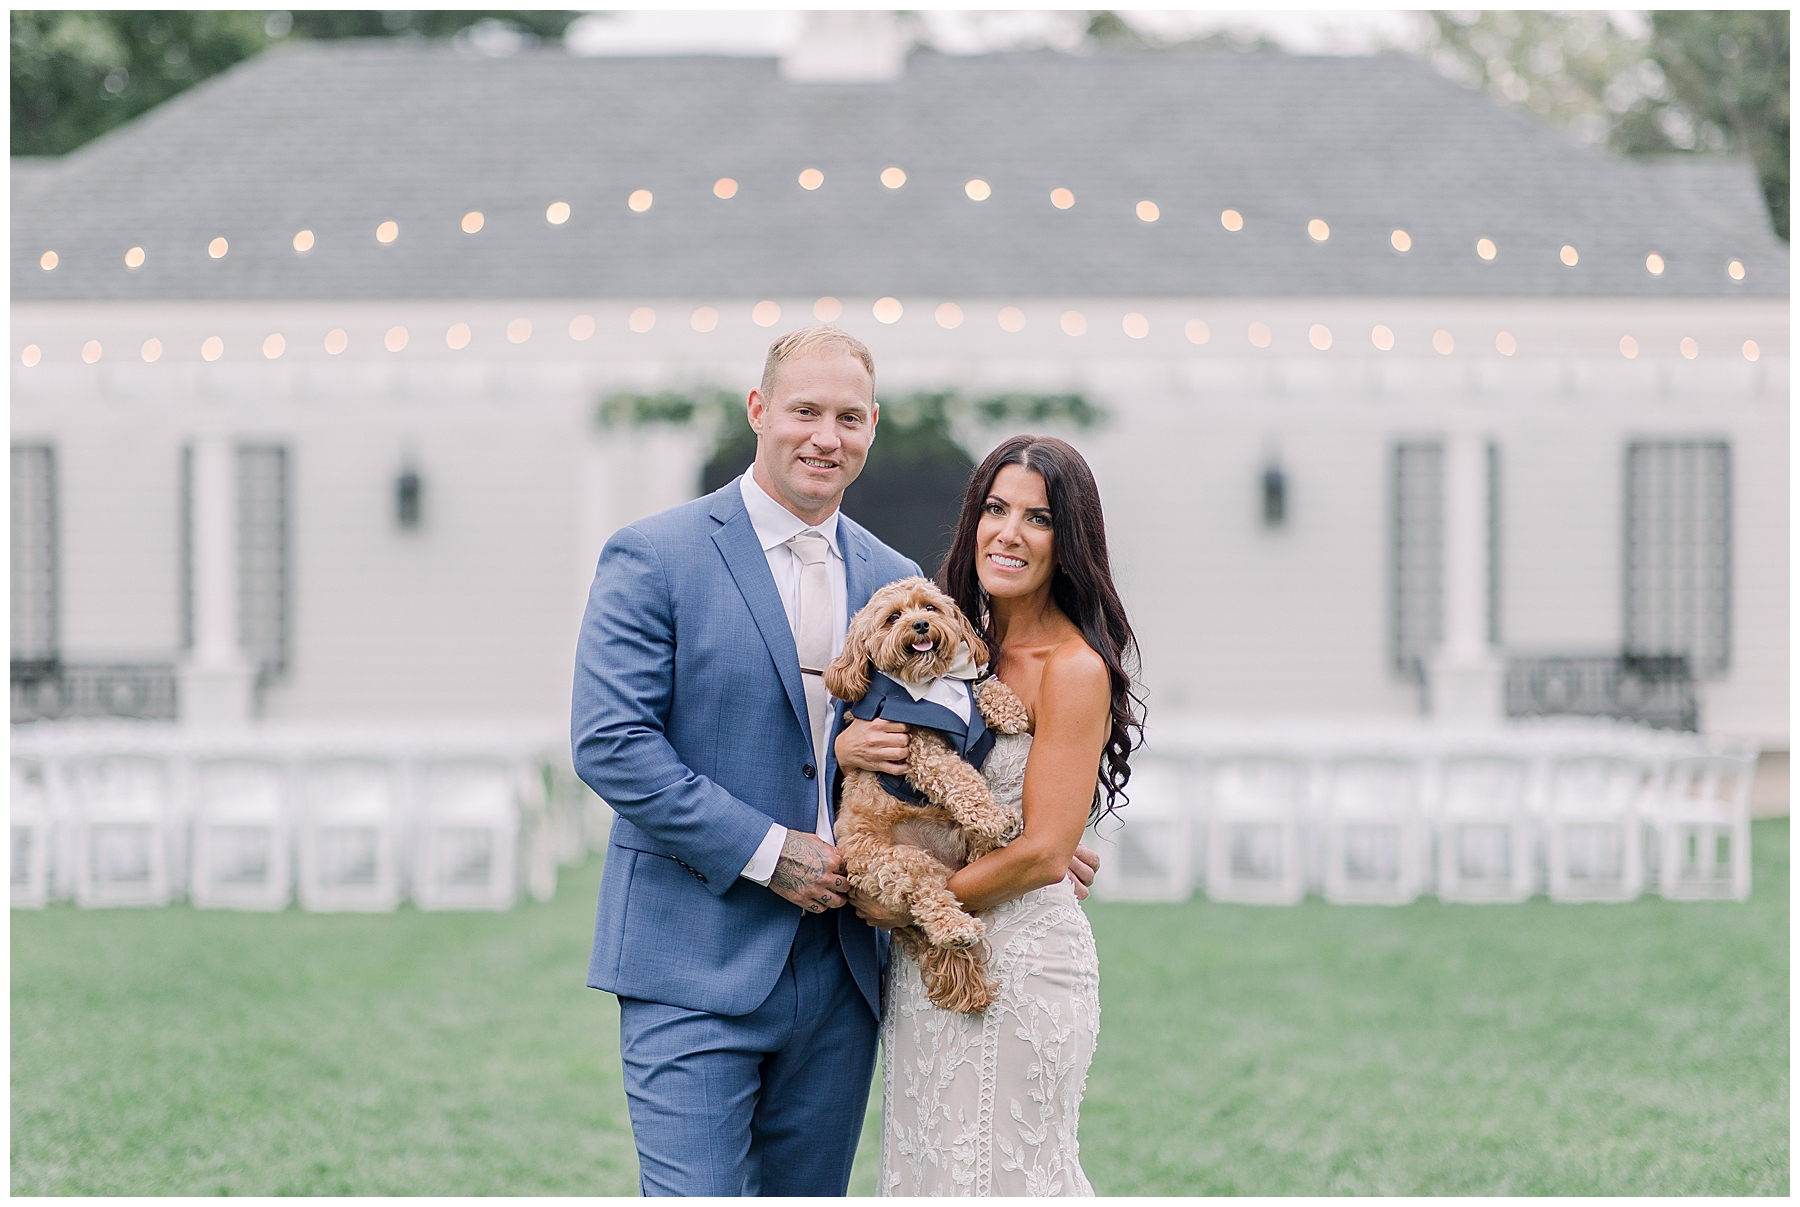 newlyweds hold their ring bearer and dog after wedding ceremony